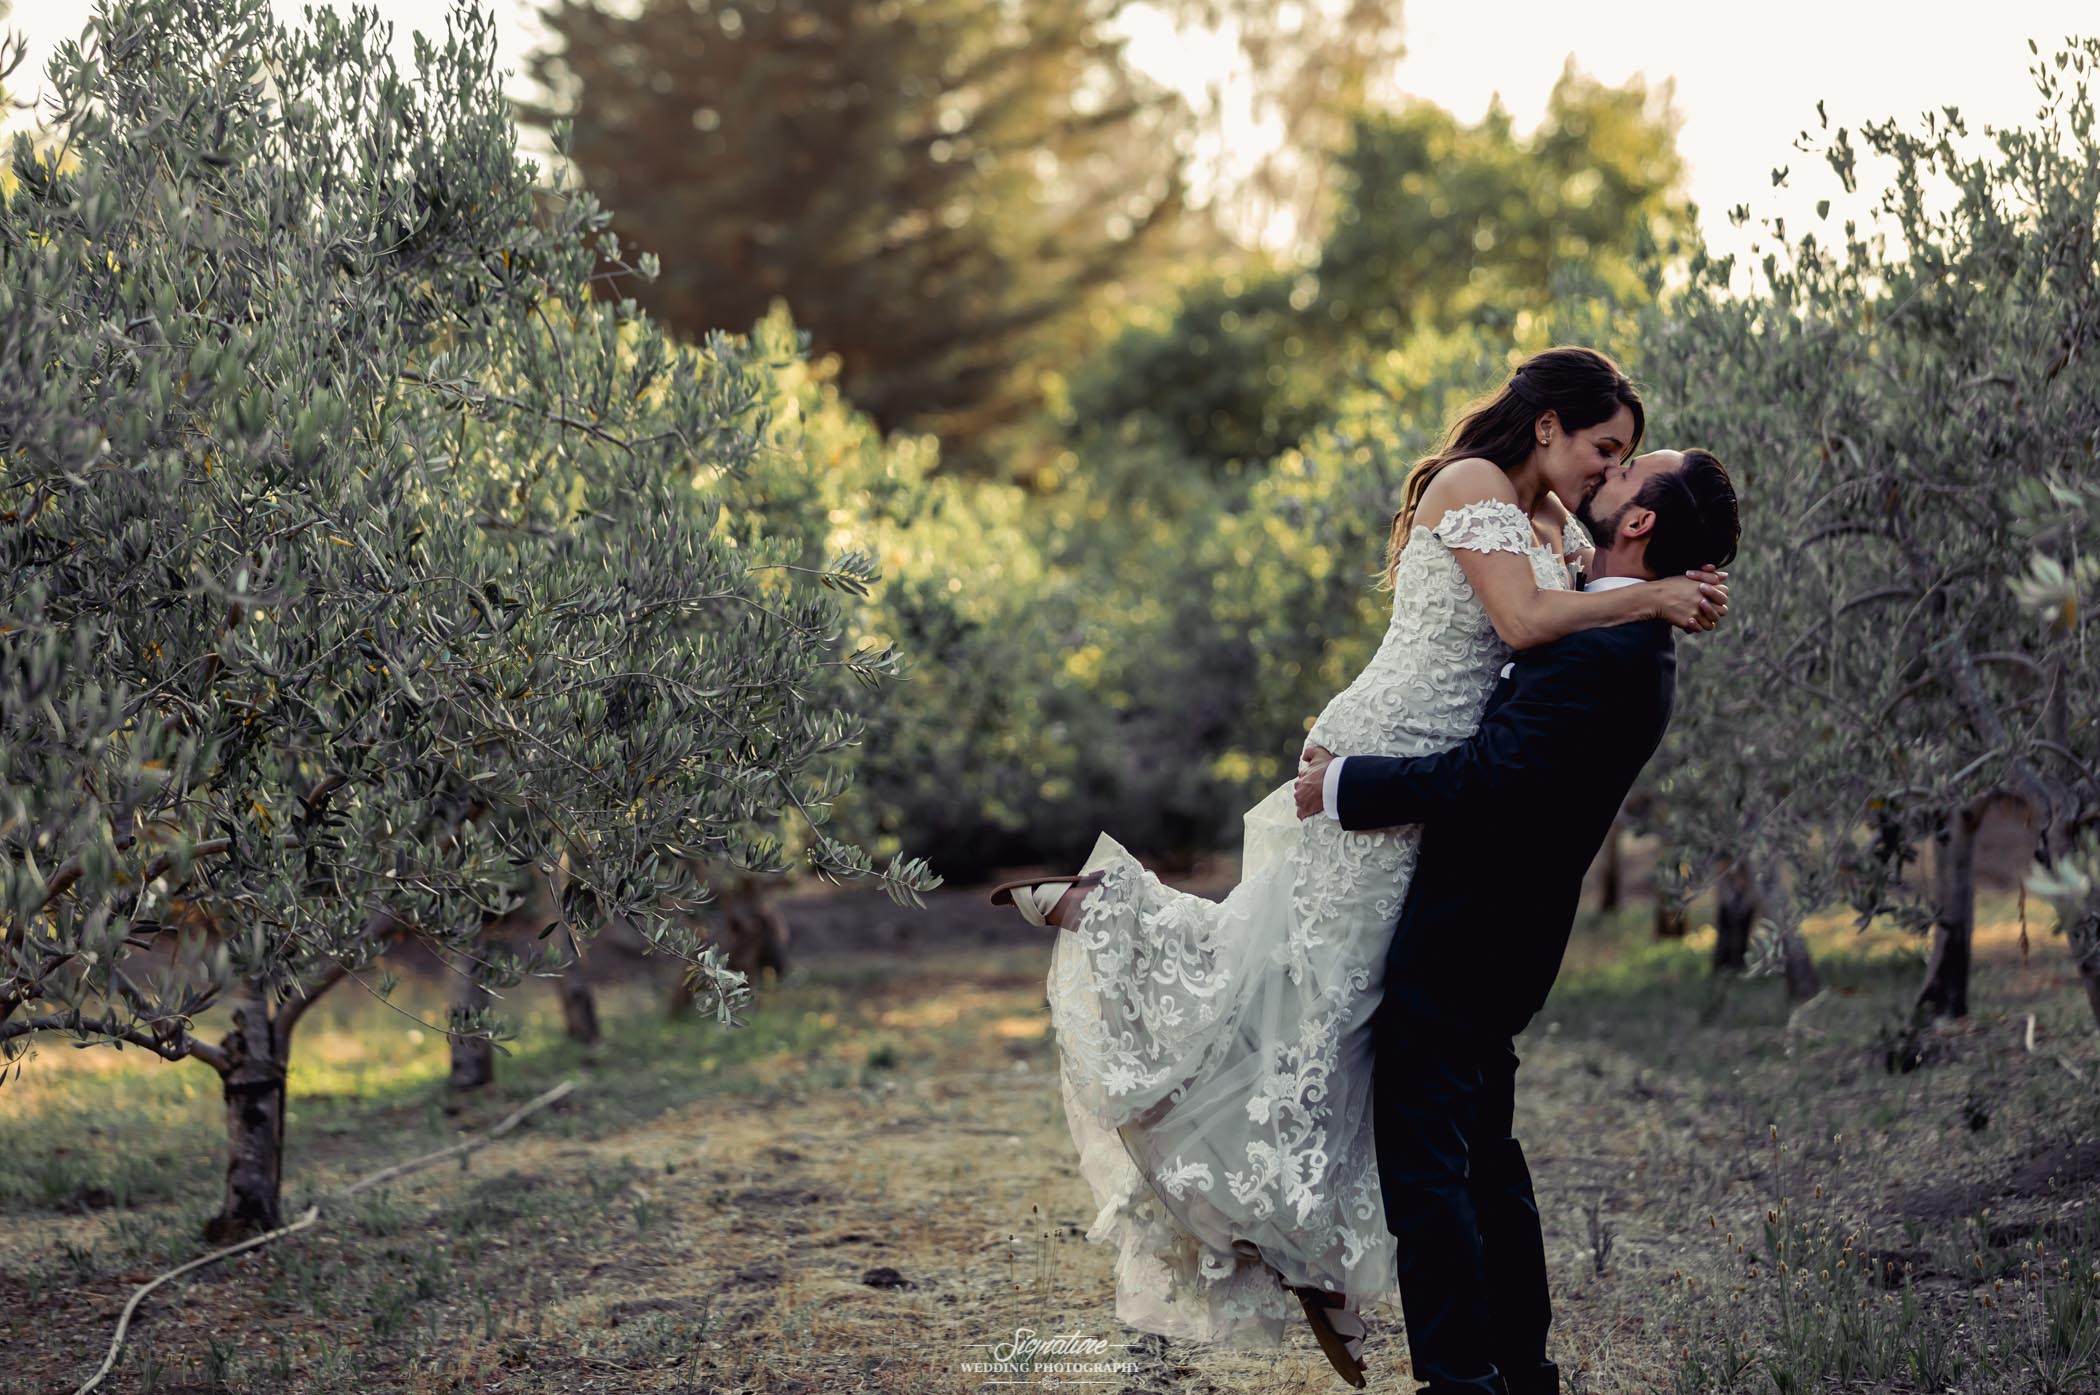 Groom picking up bride and kissing within trees